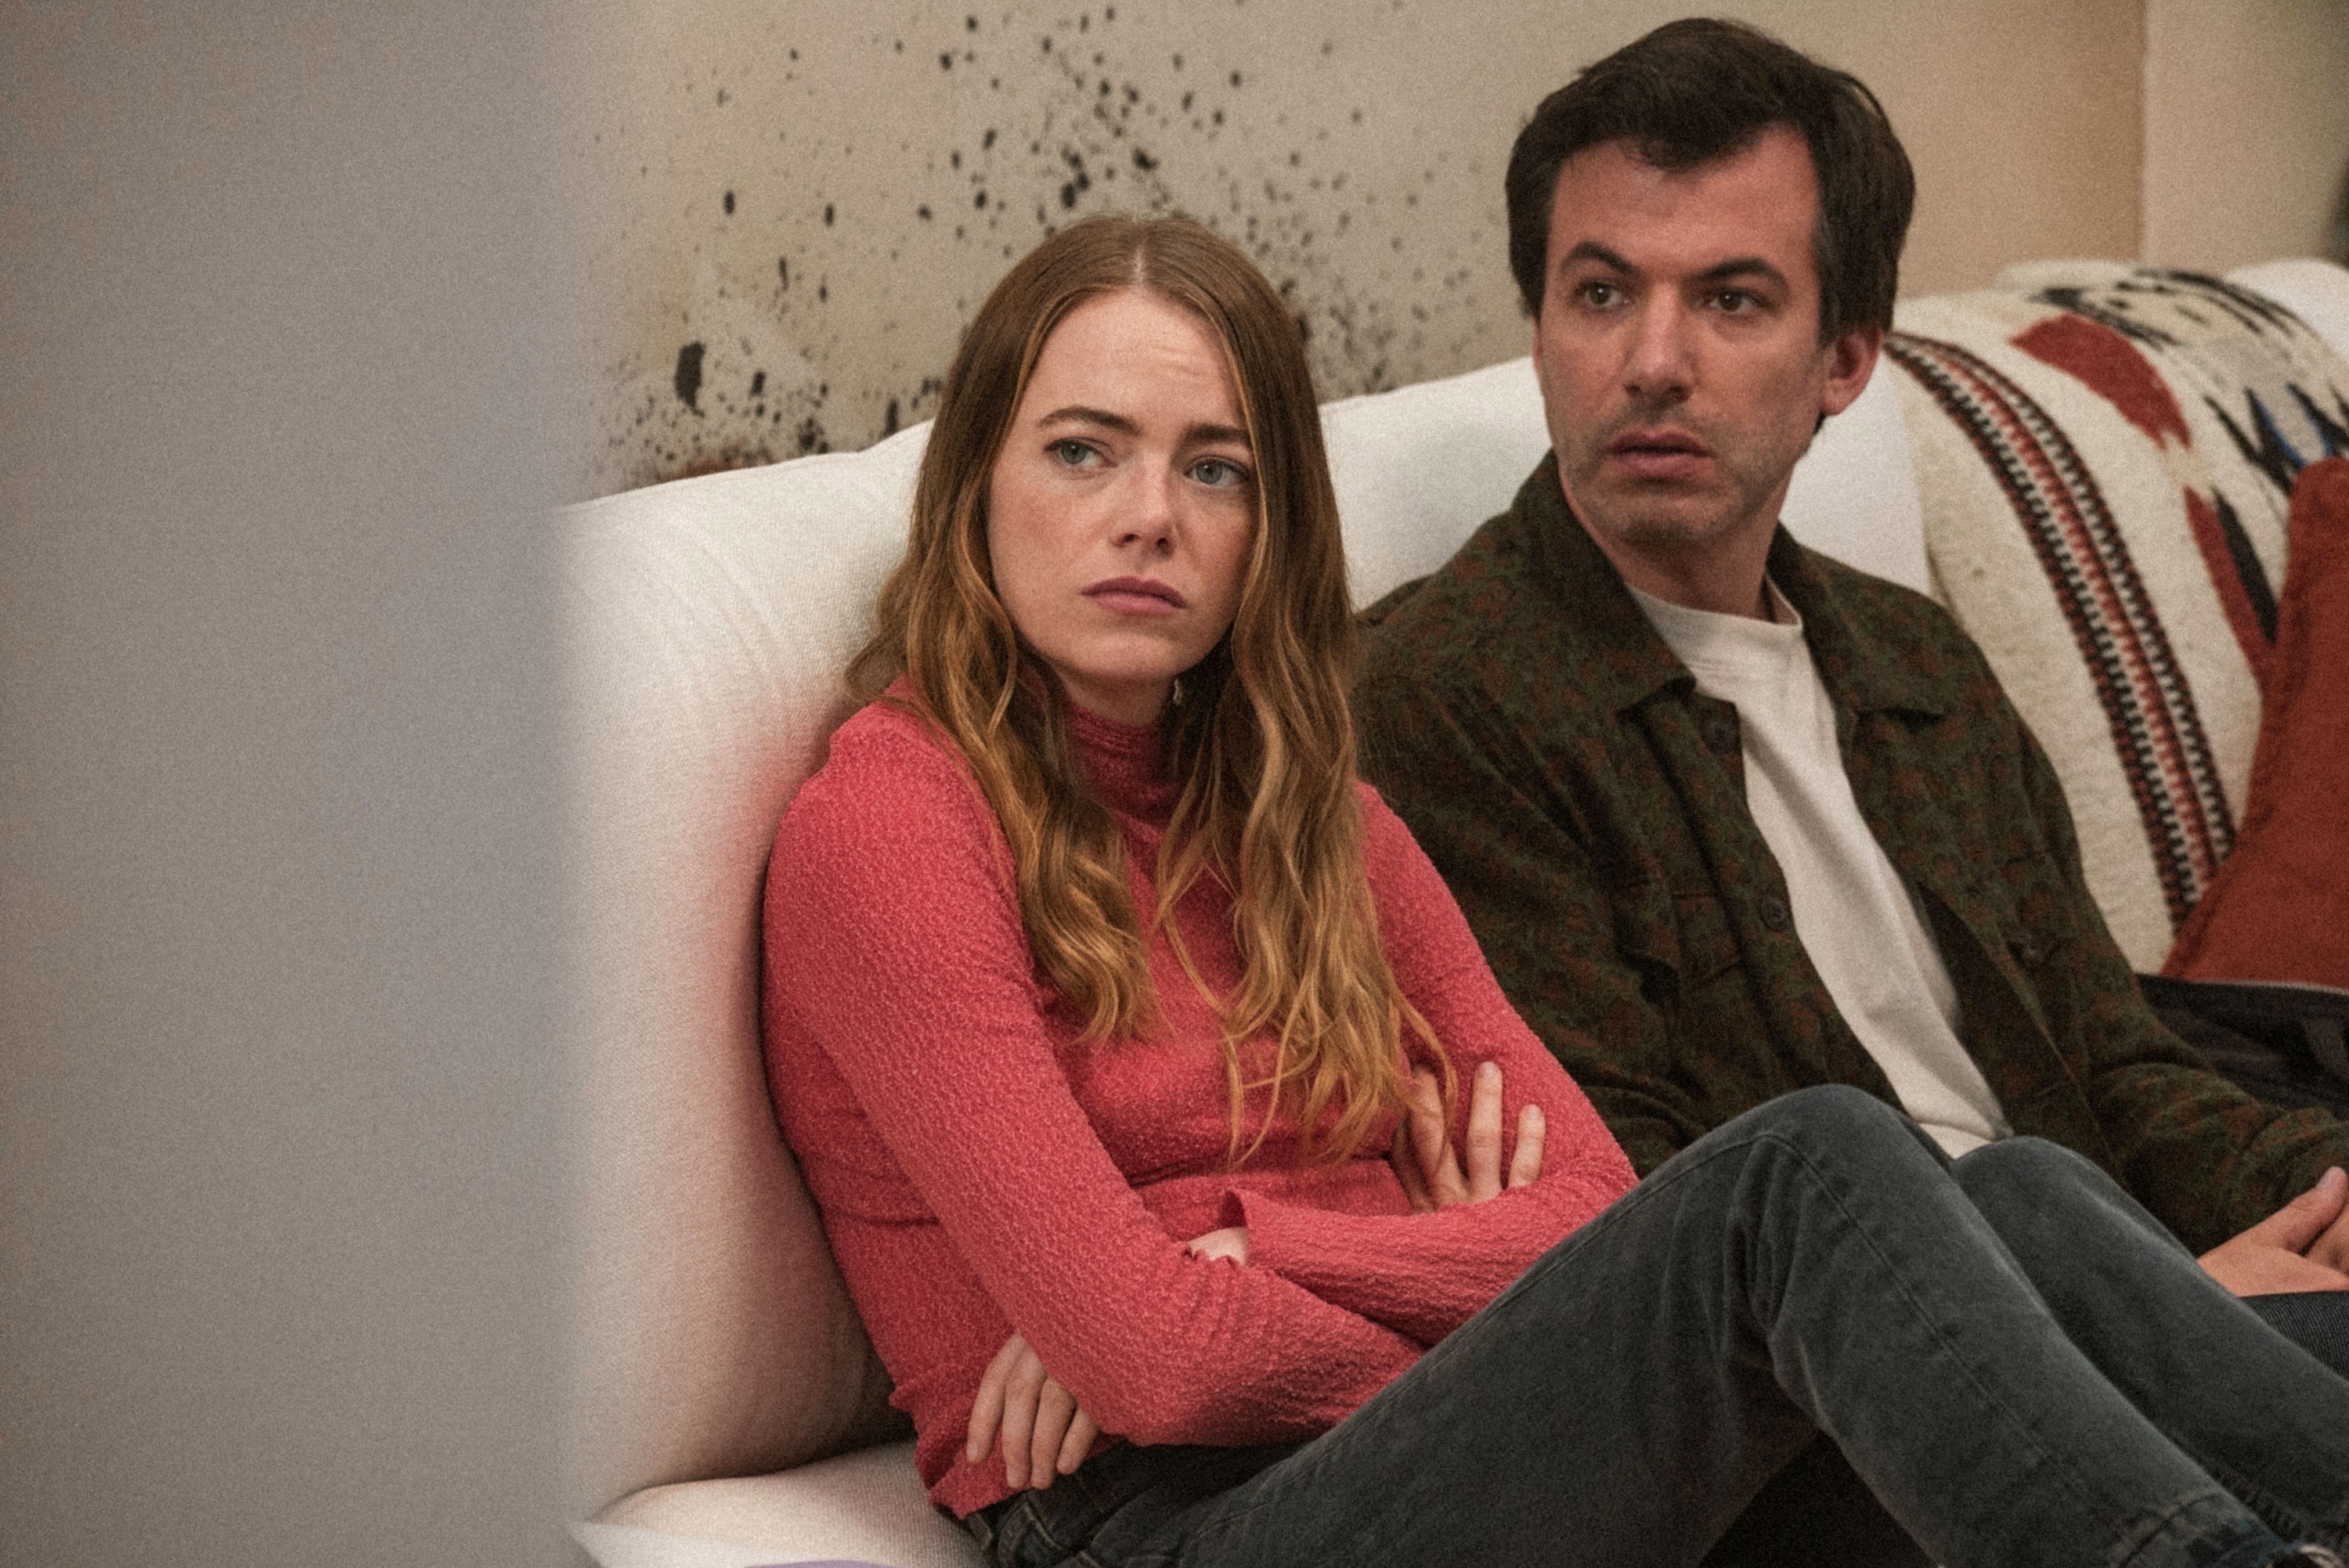 Emma sitting next Nathan Fielder in a scene from &quot;The Curse&quot;